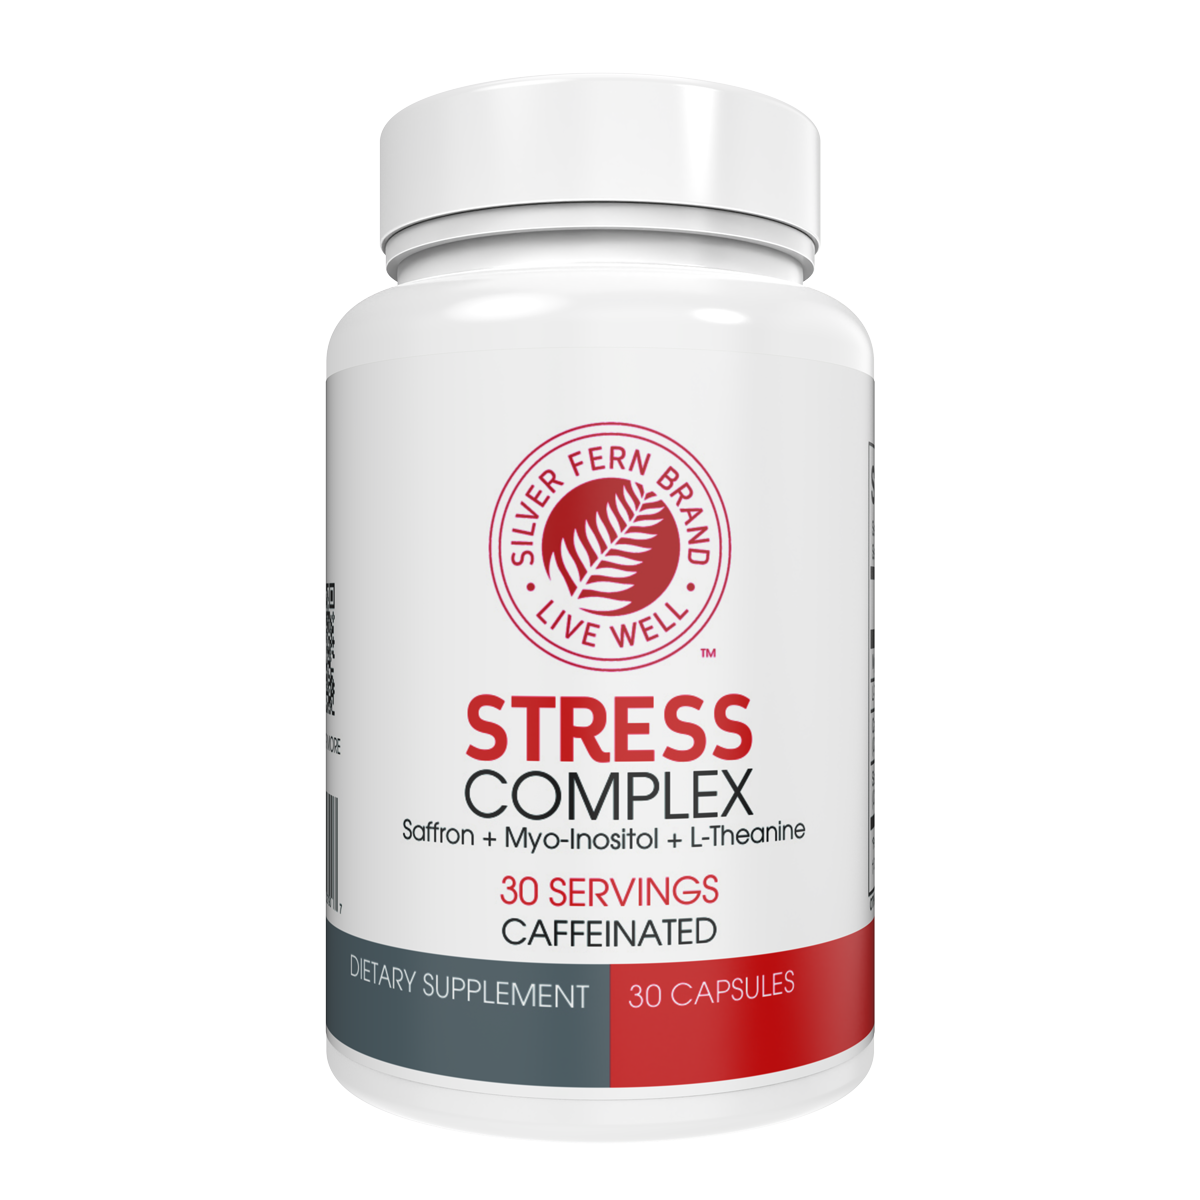 Stress Complex - Sleep, Worry, Mood and More!